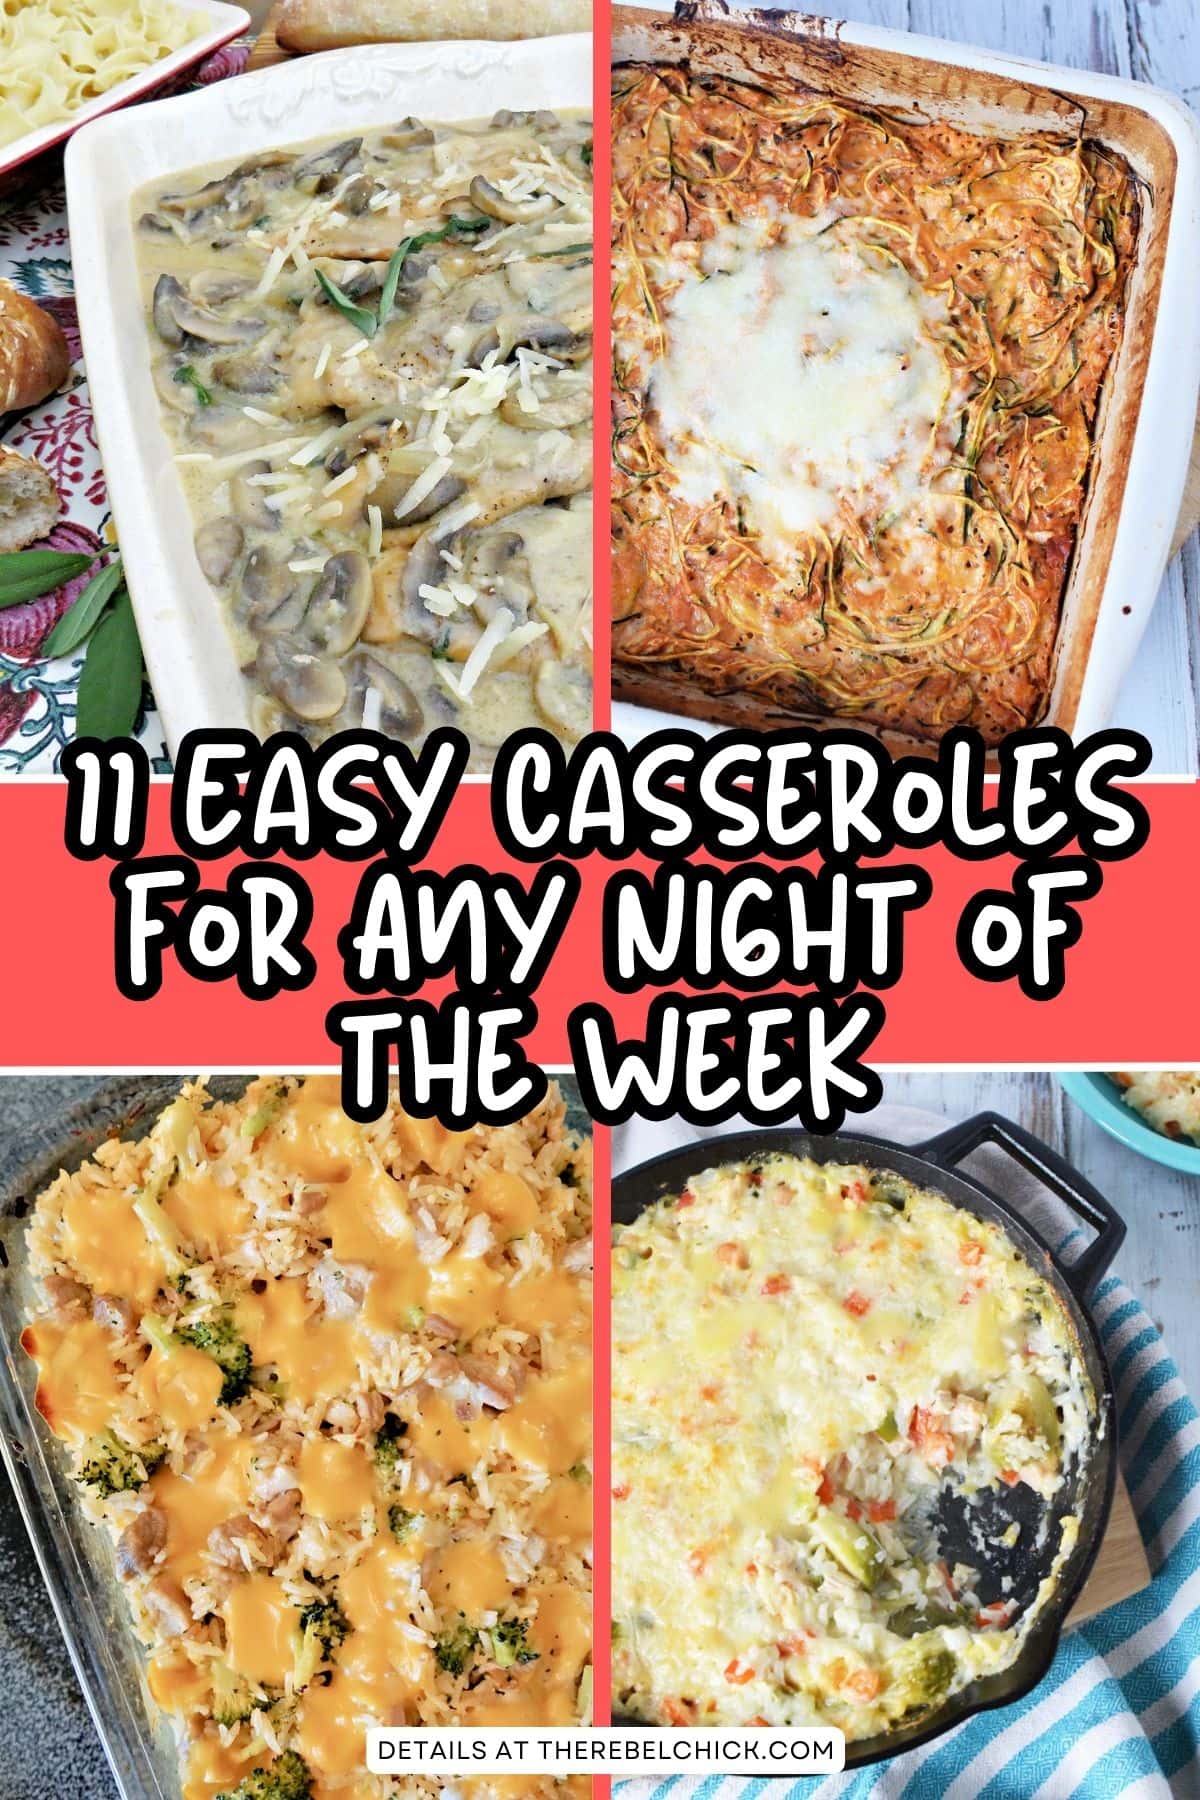 11 Easy Casseroles for Any Night of the Week